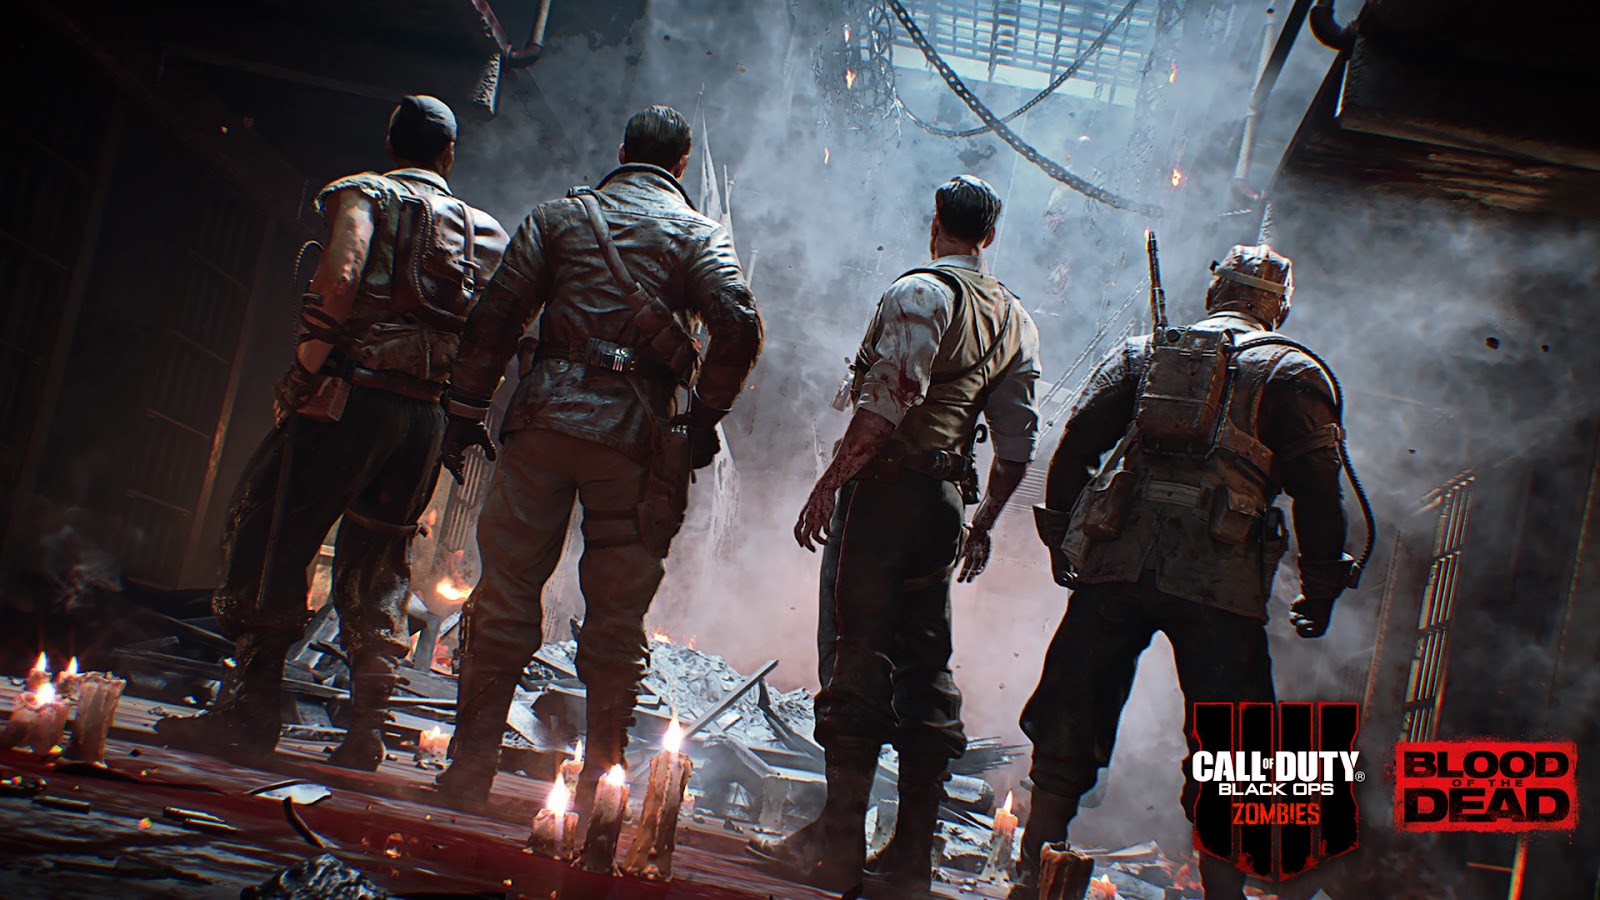 Call of Duty Black Ops Zombies chegará ao Android